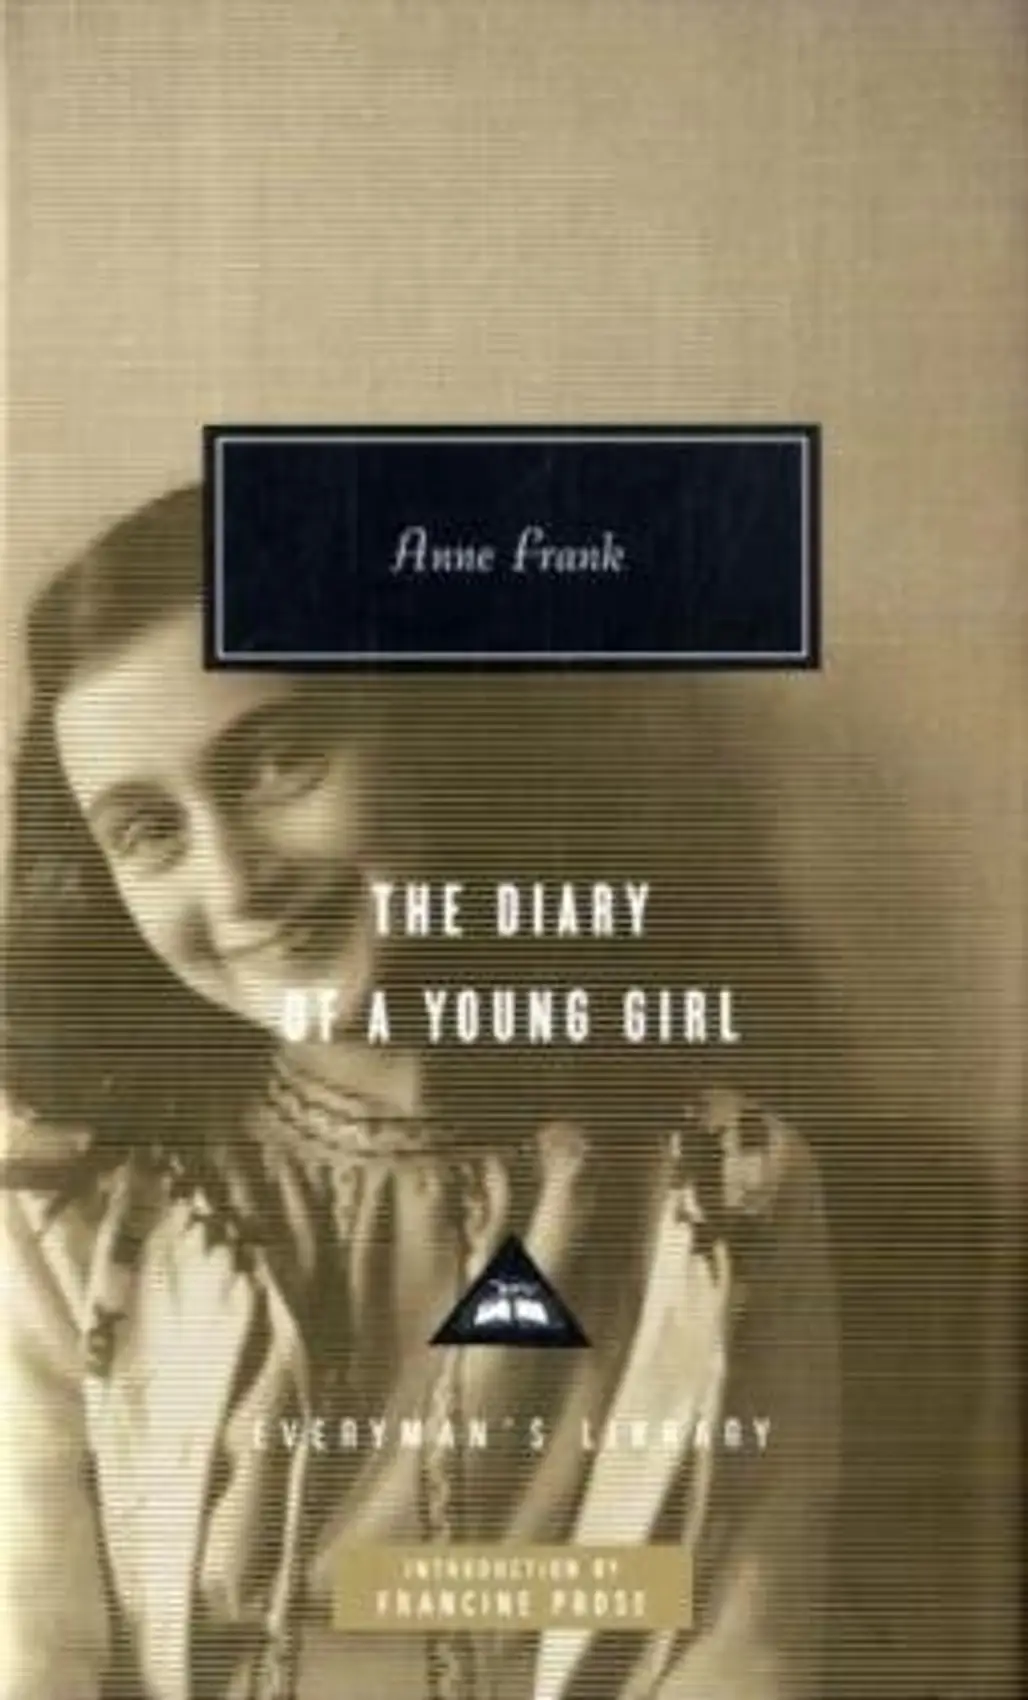 The Diary of Anne Frank by Anne Frank